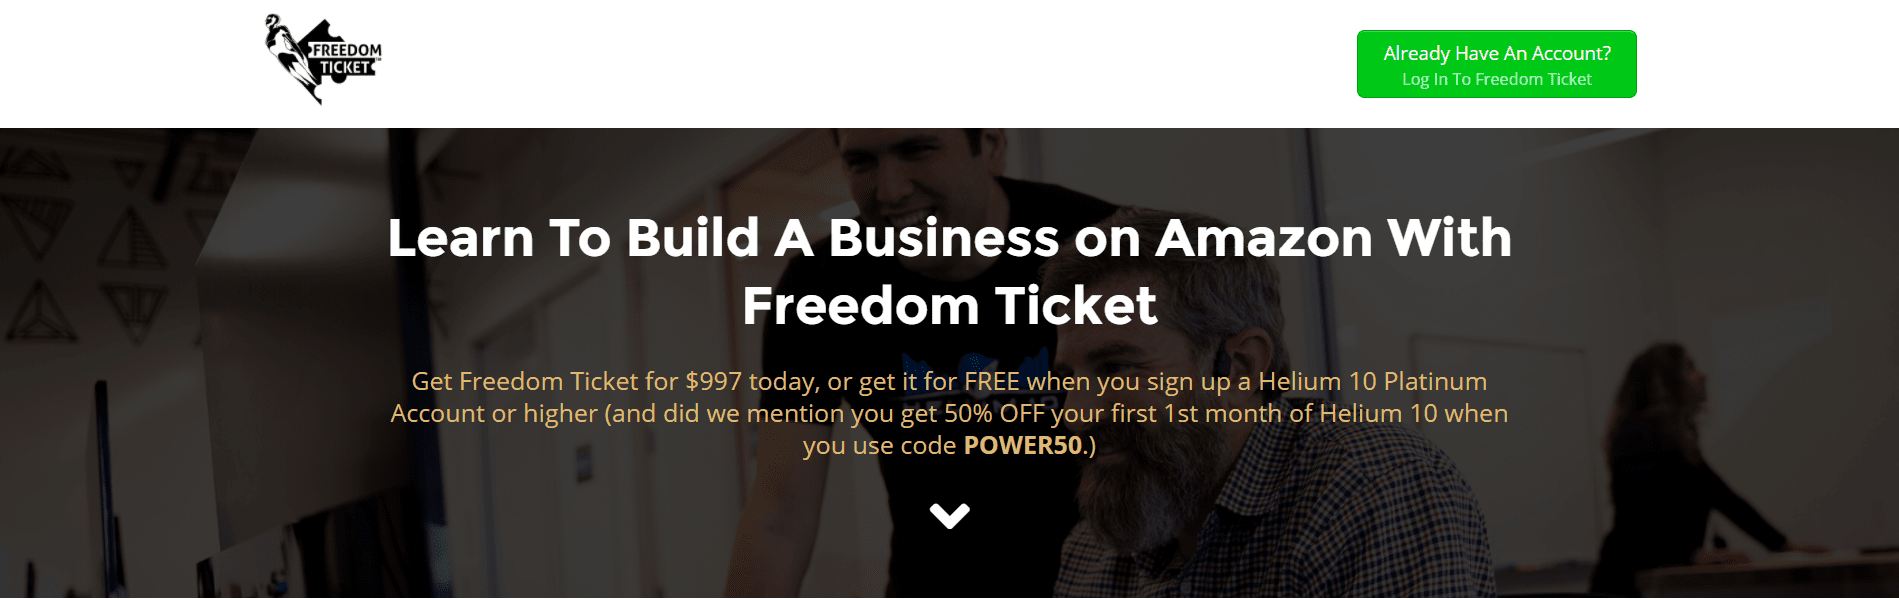 Freedom Ticket-Overview